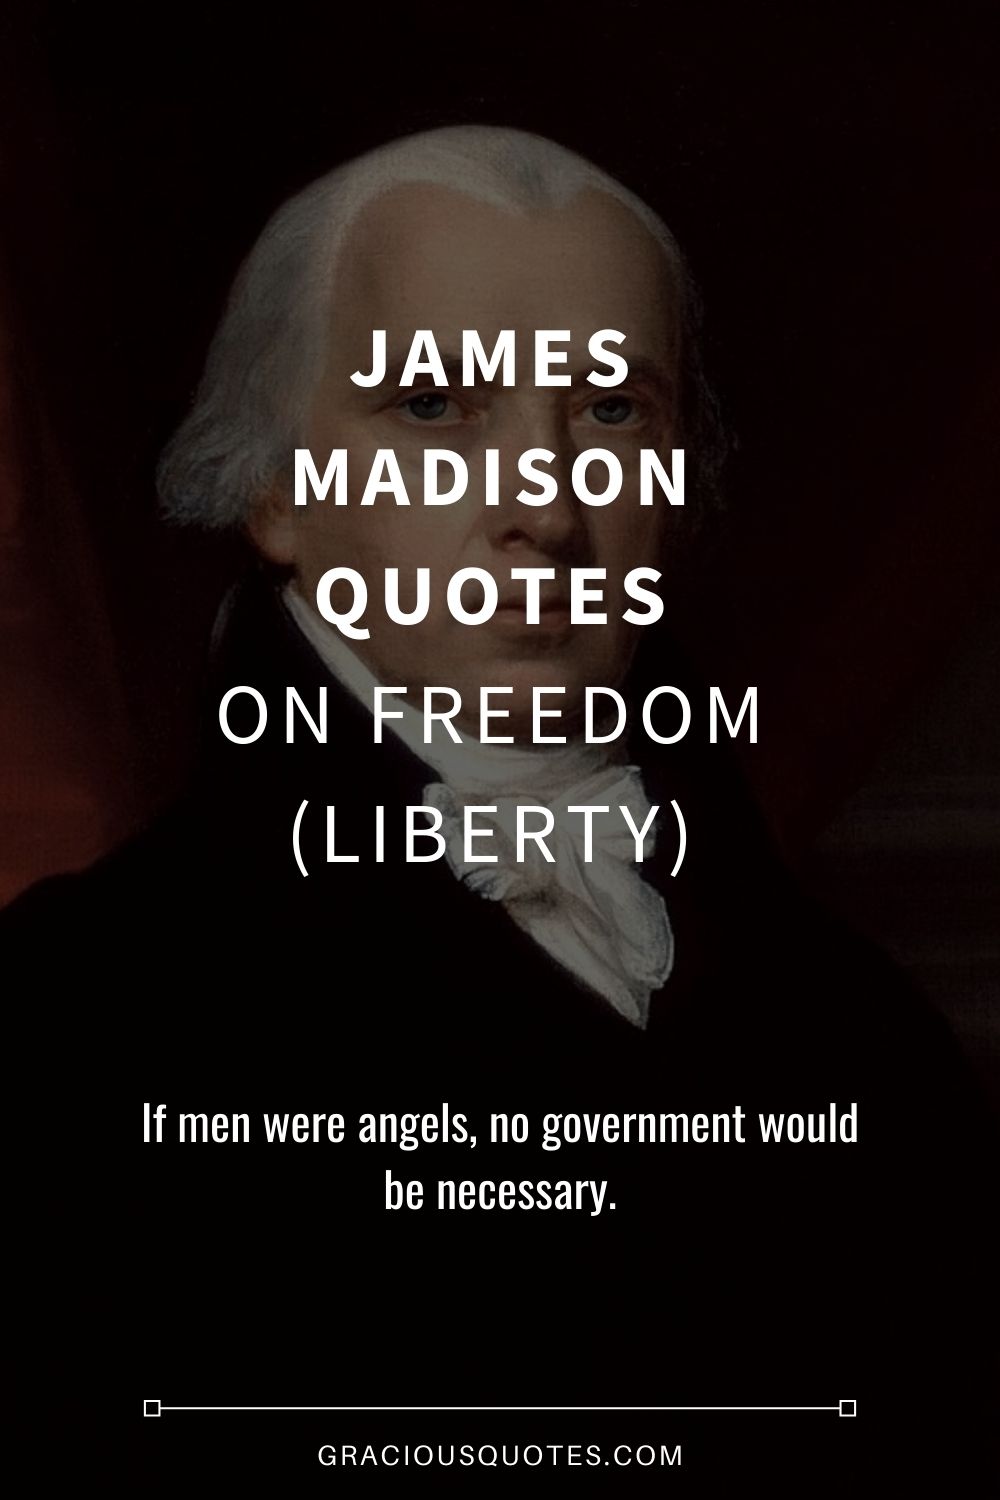 James Madison Quotes on Freedom (LIBERTY) - Gracious Quotes